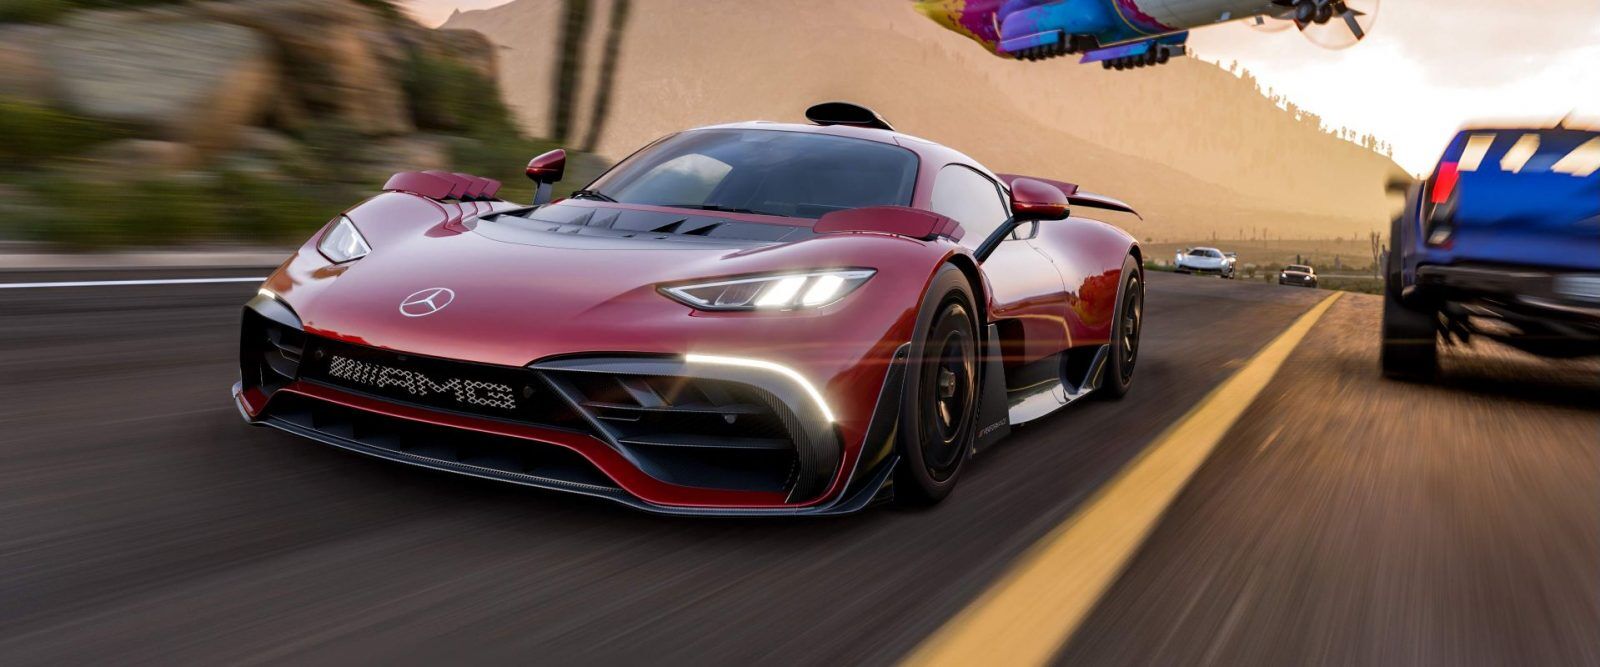 These 5 cars should be in Forza Horizon 5